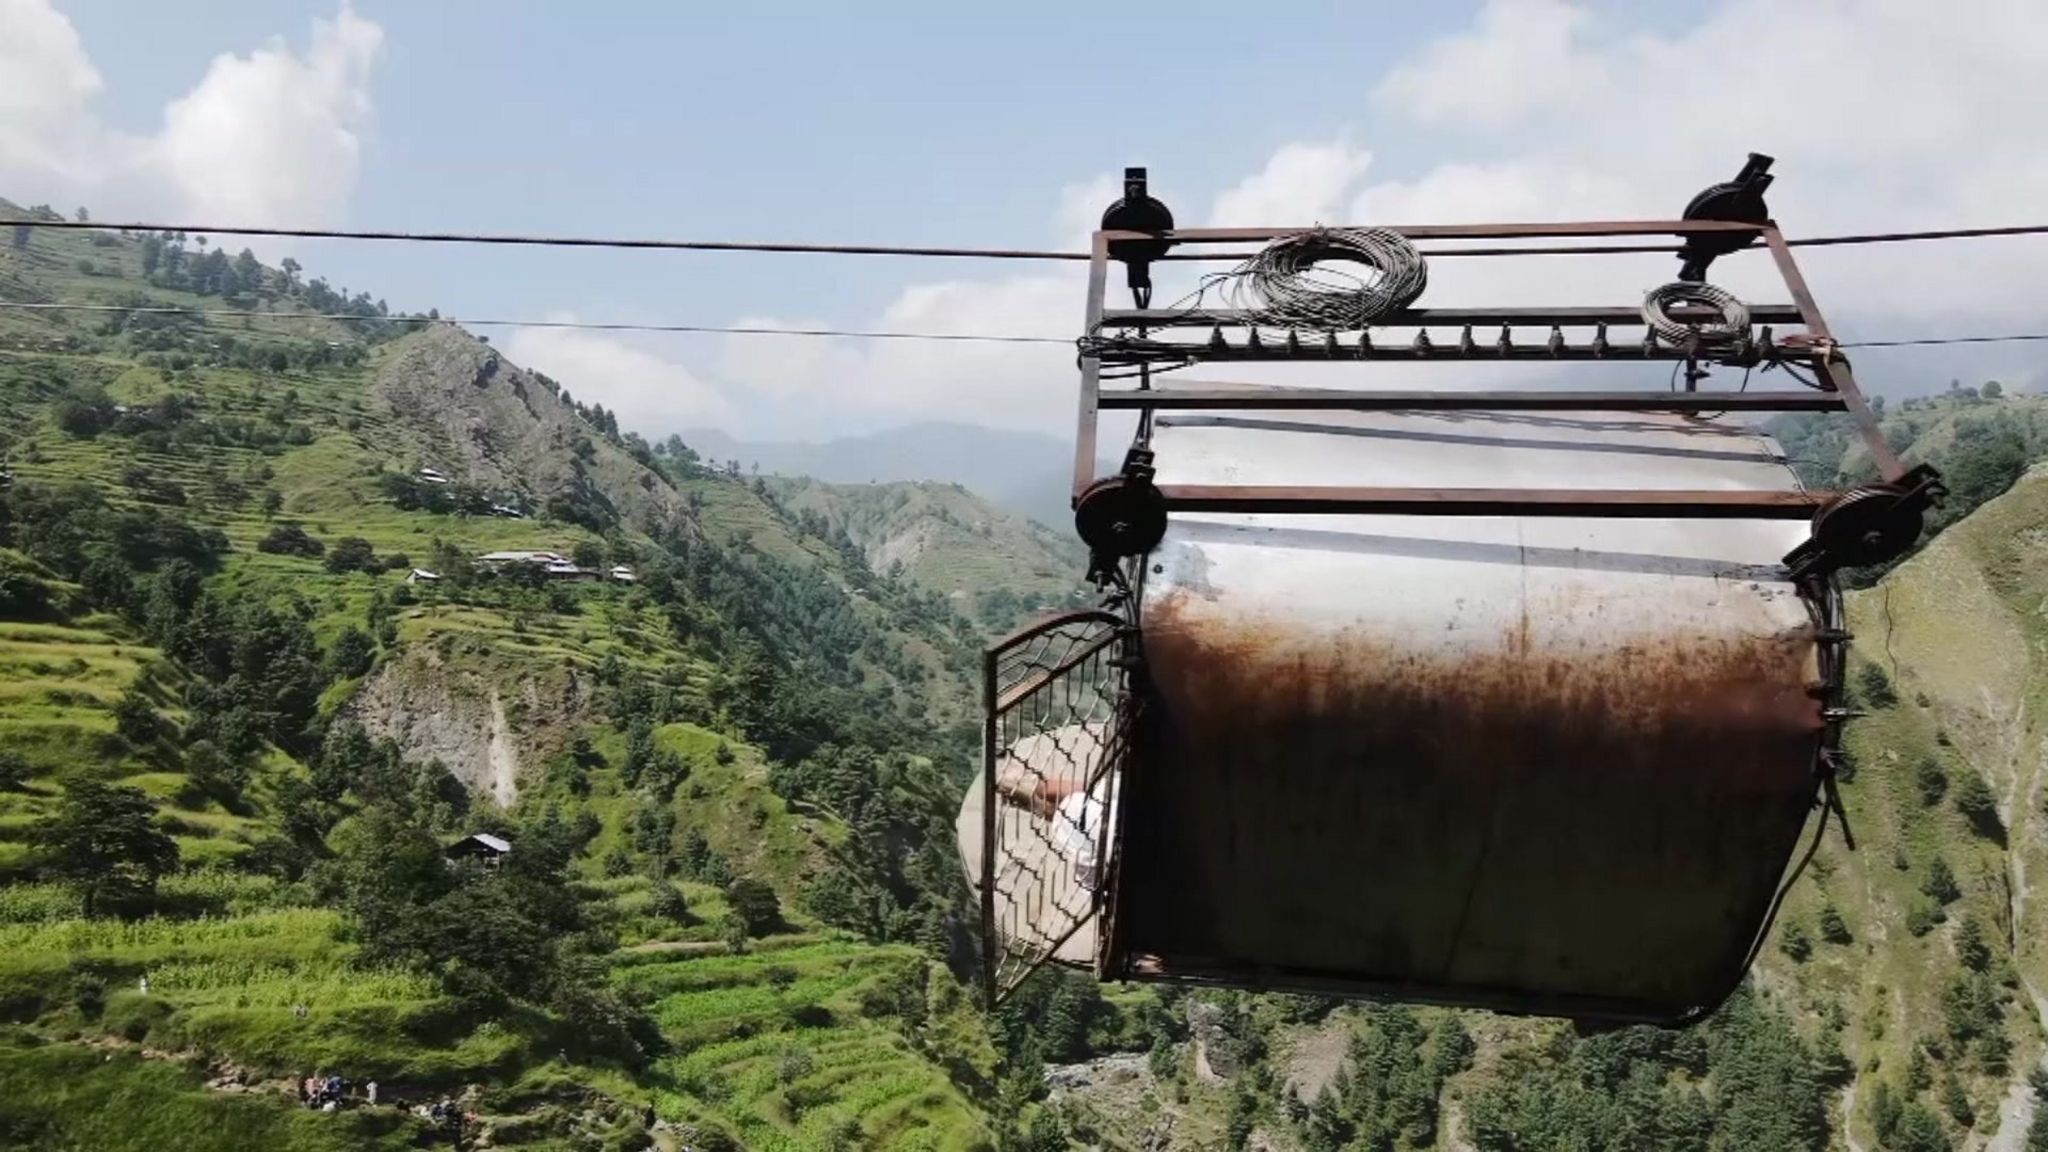 Drone footage showing the cable car up close, dangling over the ravine.